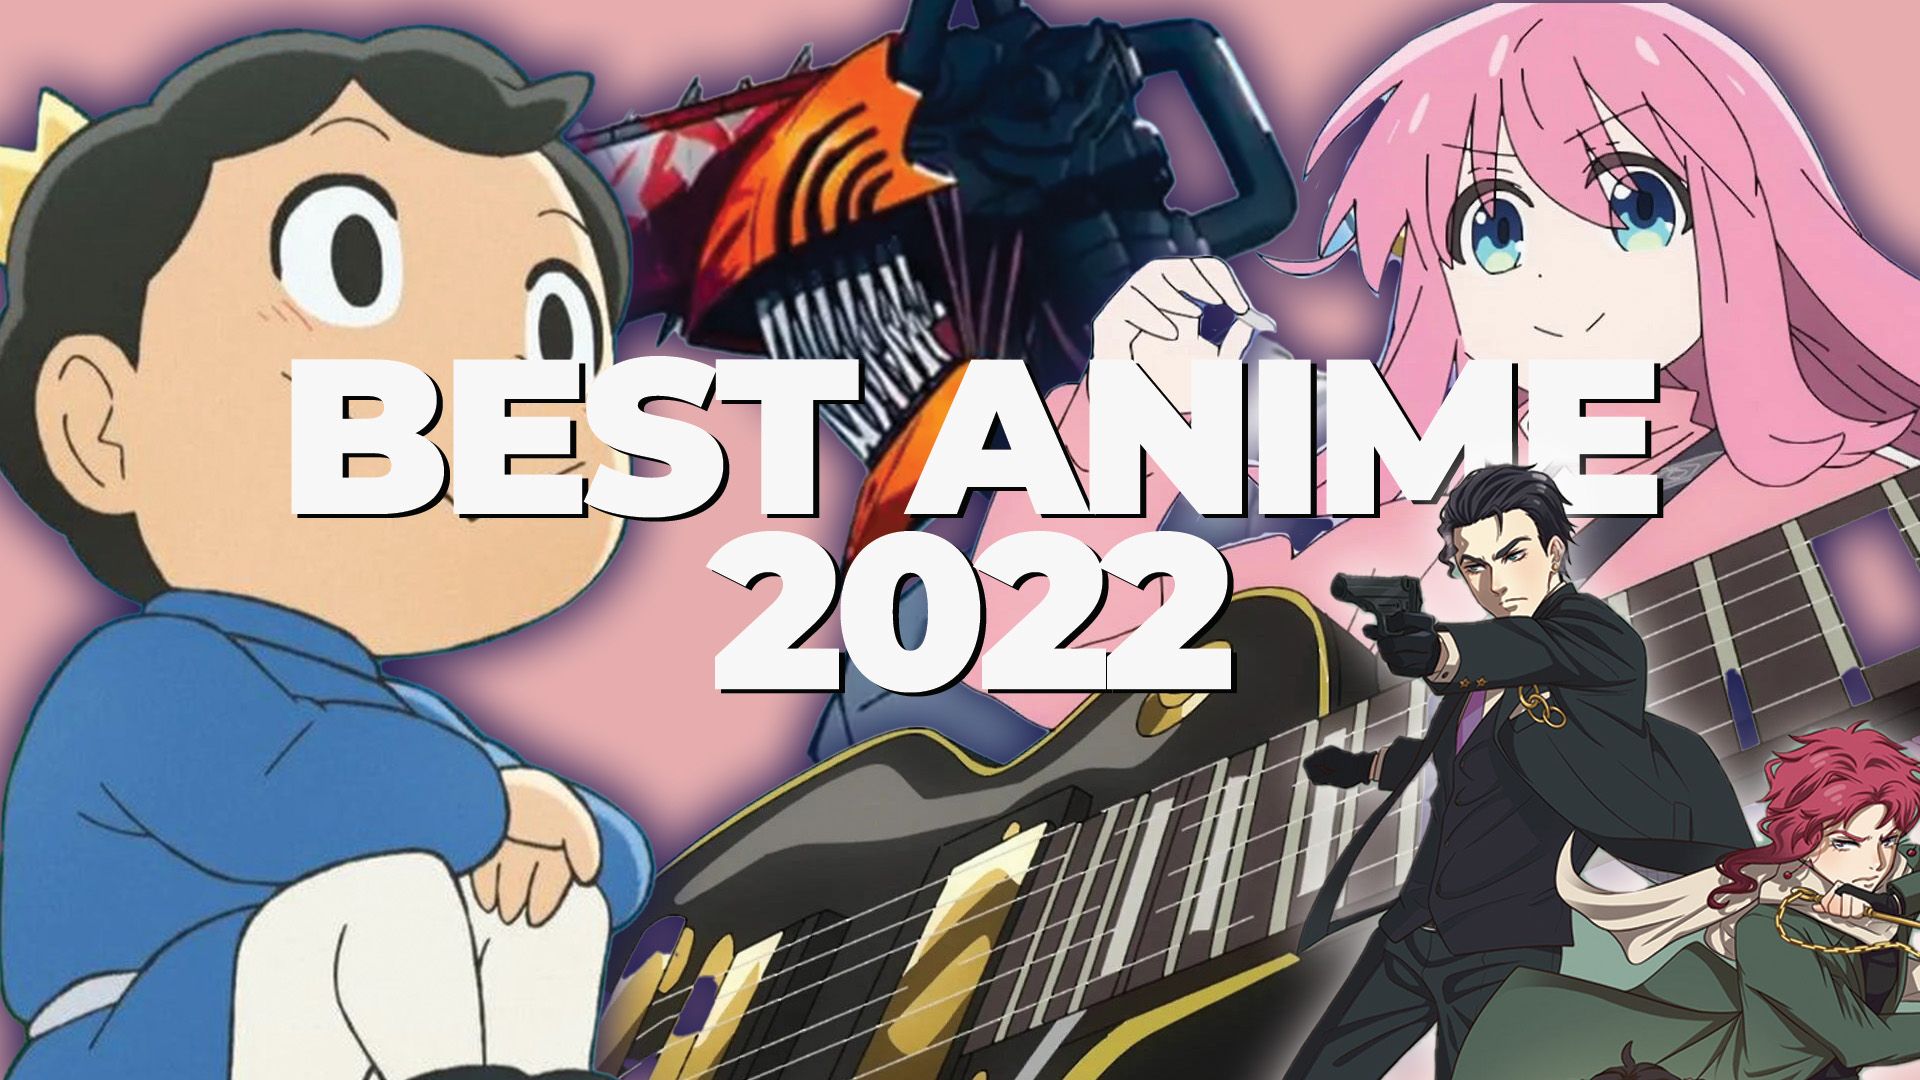 The best anime shows of 2022